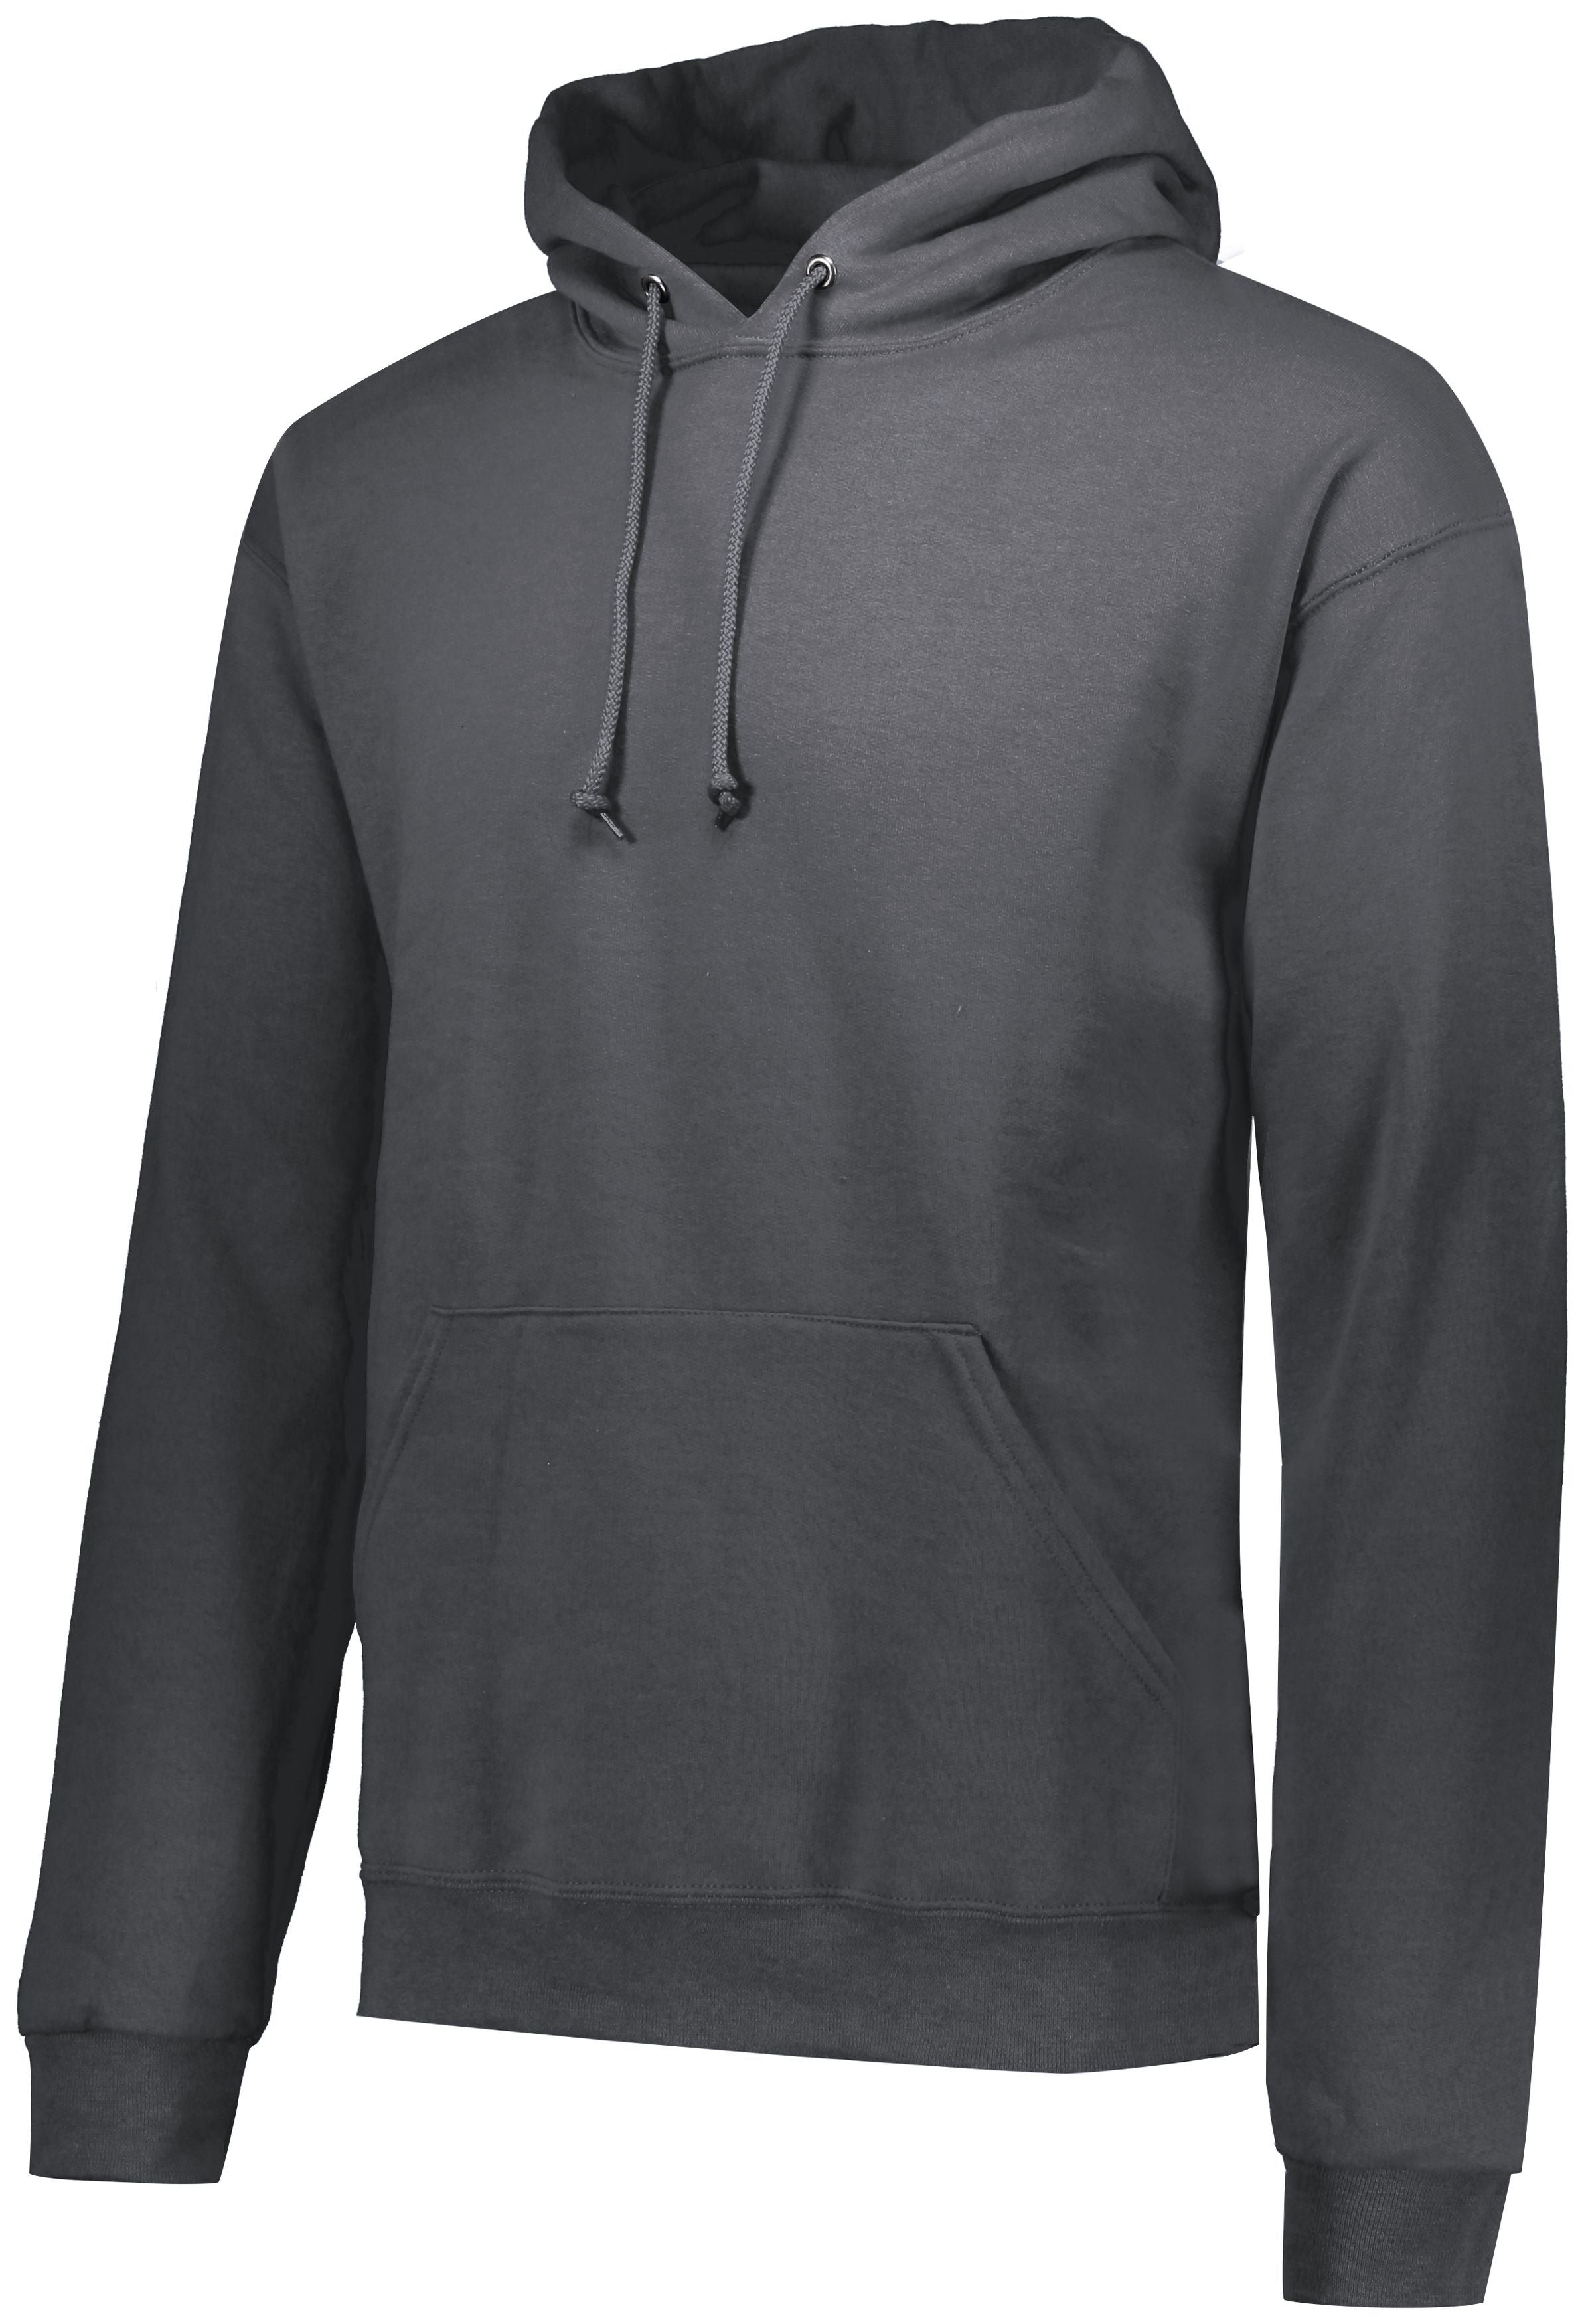 Russell Athletic Jerzees 50/50 Hoodie in Charcoal Grey  -Part of the Adult, Russell-Athletic-Products, Shirts product lines at KanaleyCreations.com